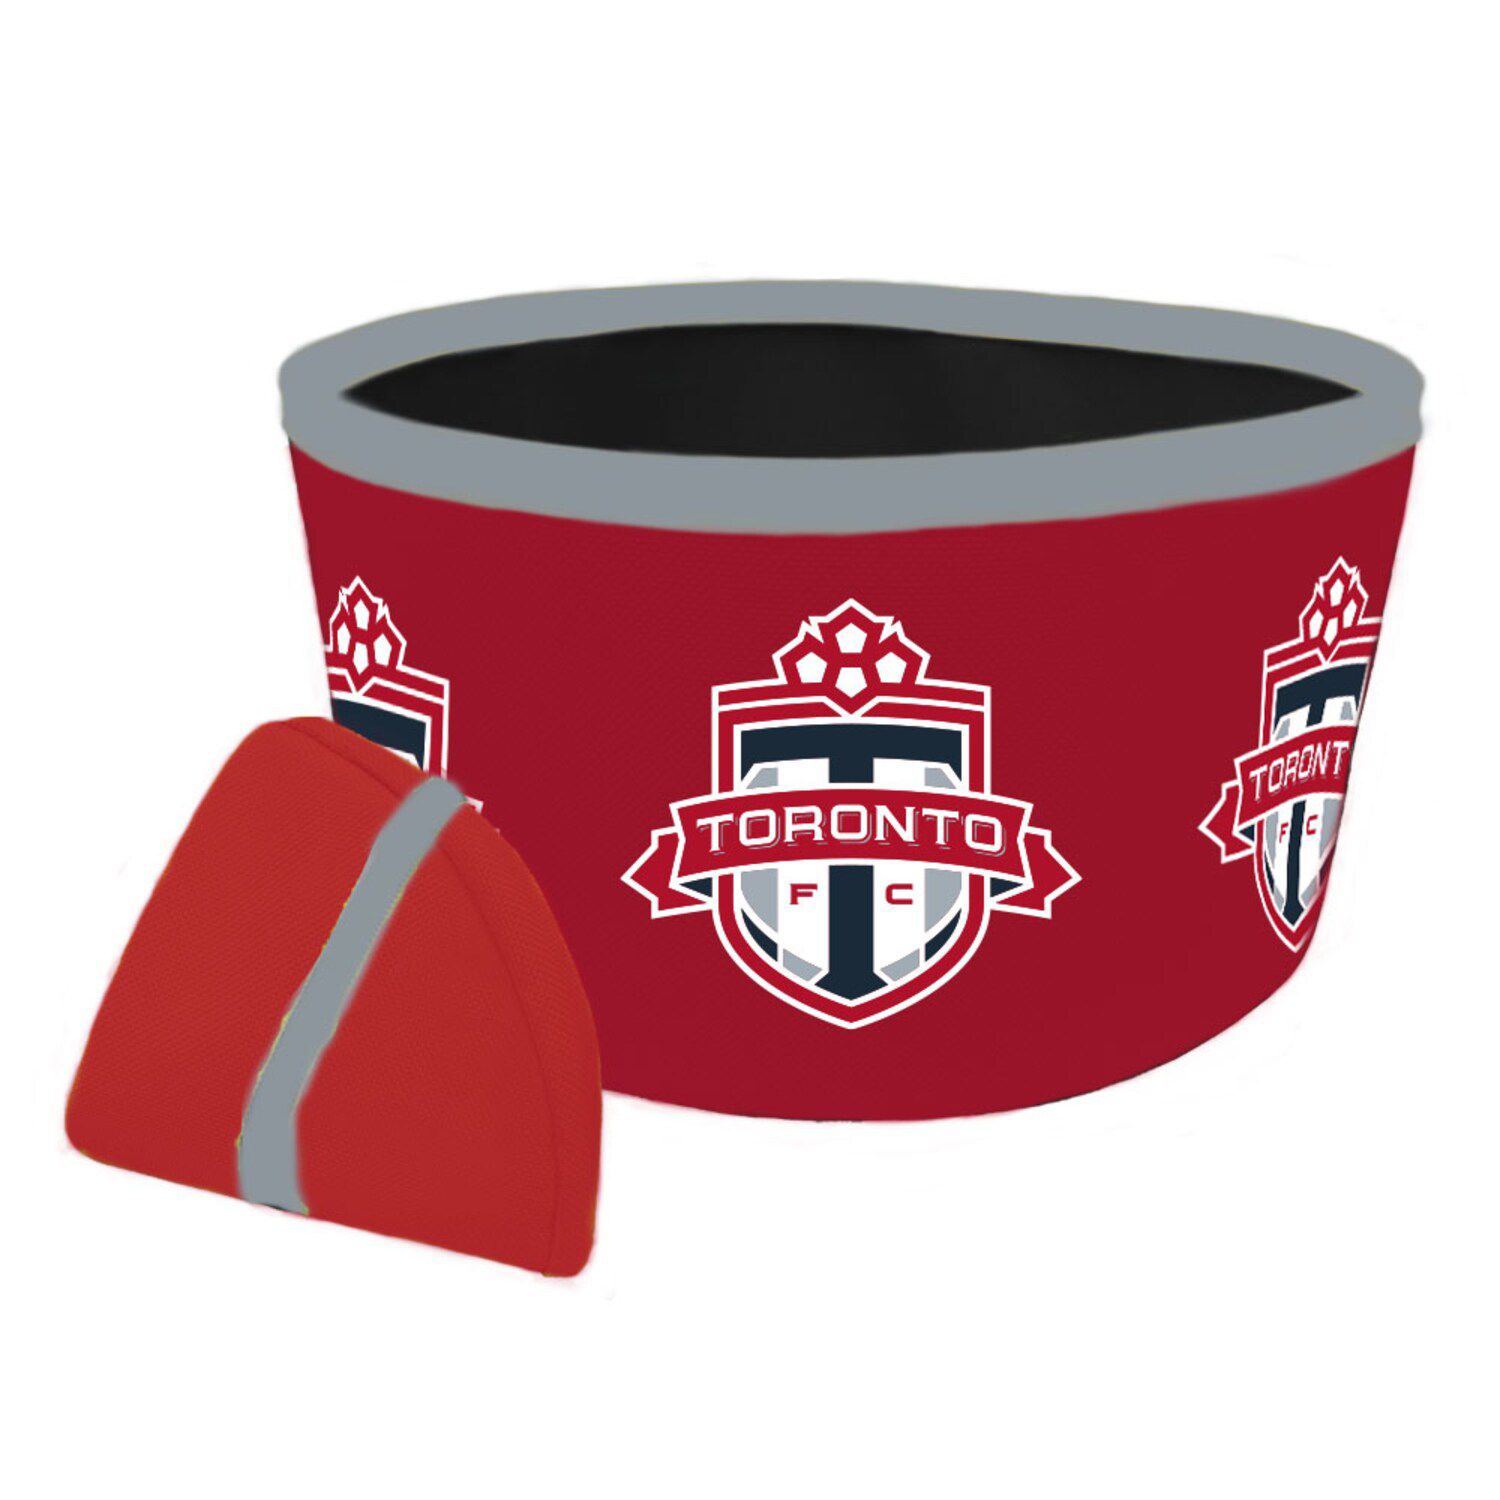 Image for Unbranded Toronto FC Collapsible Travel Dog Bowl at Kohl's.